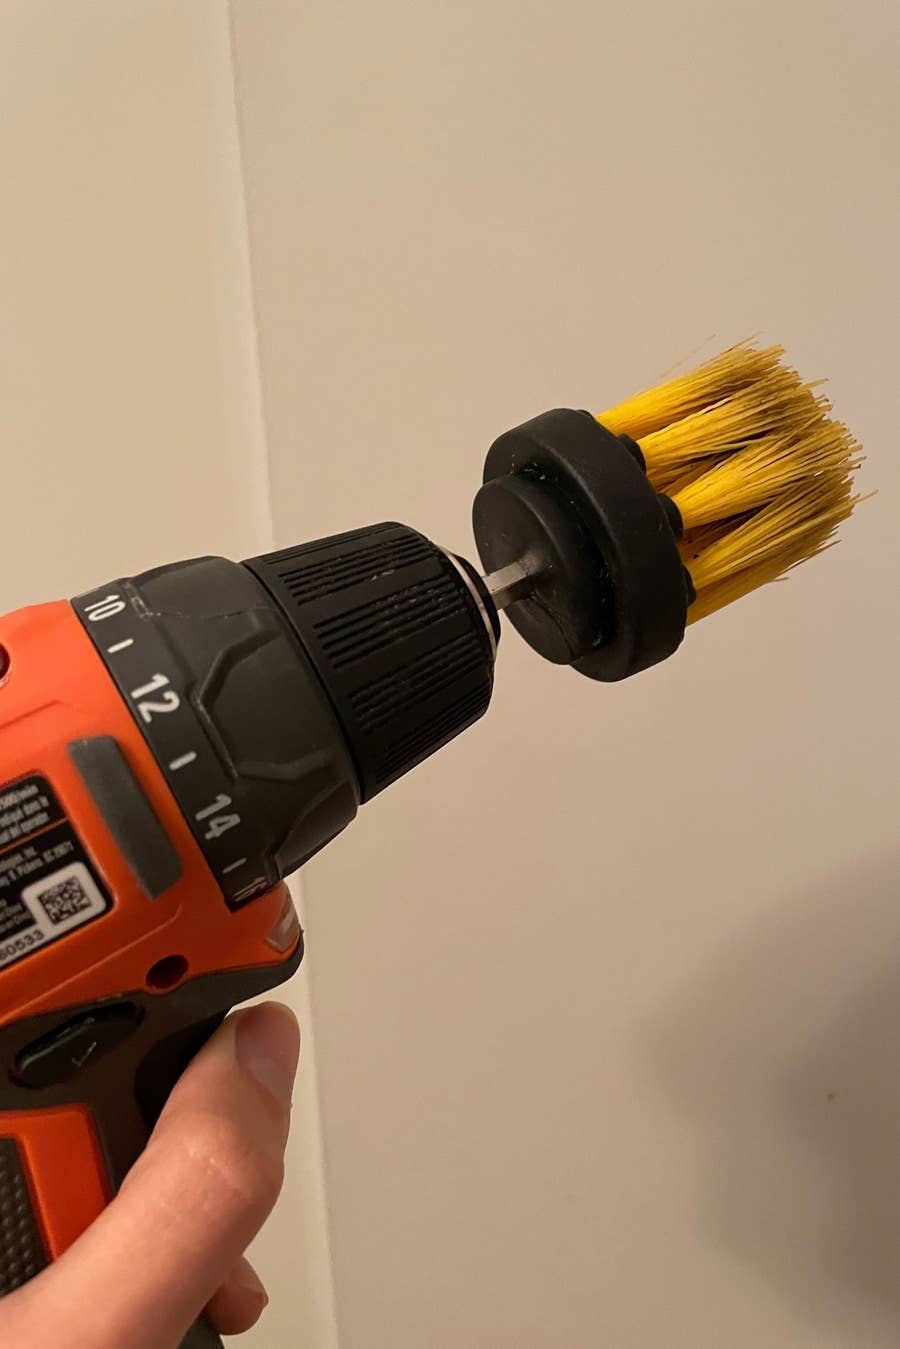 Look how many things we cleaned with this drill brush